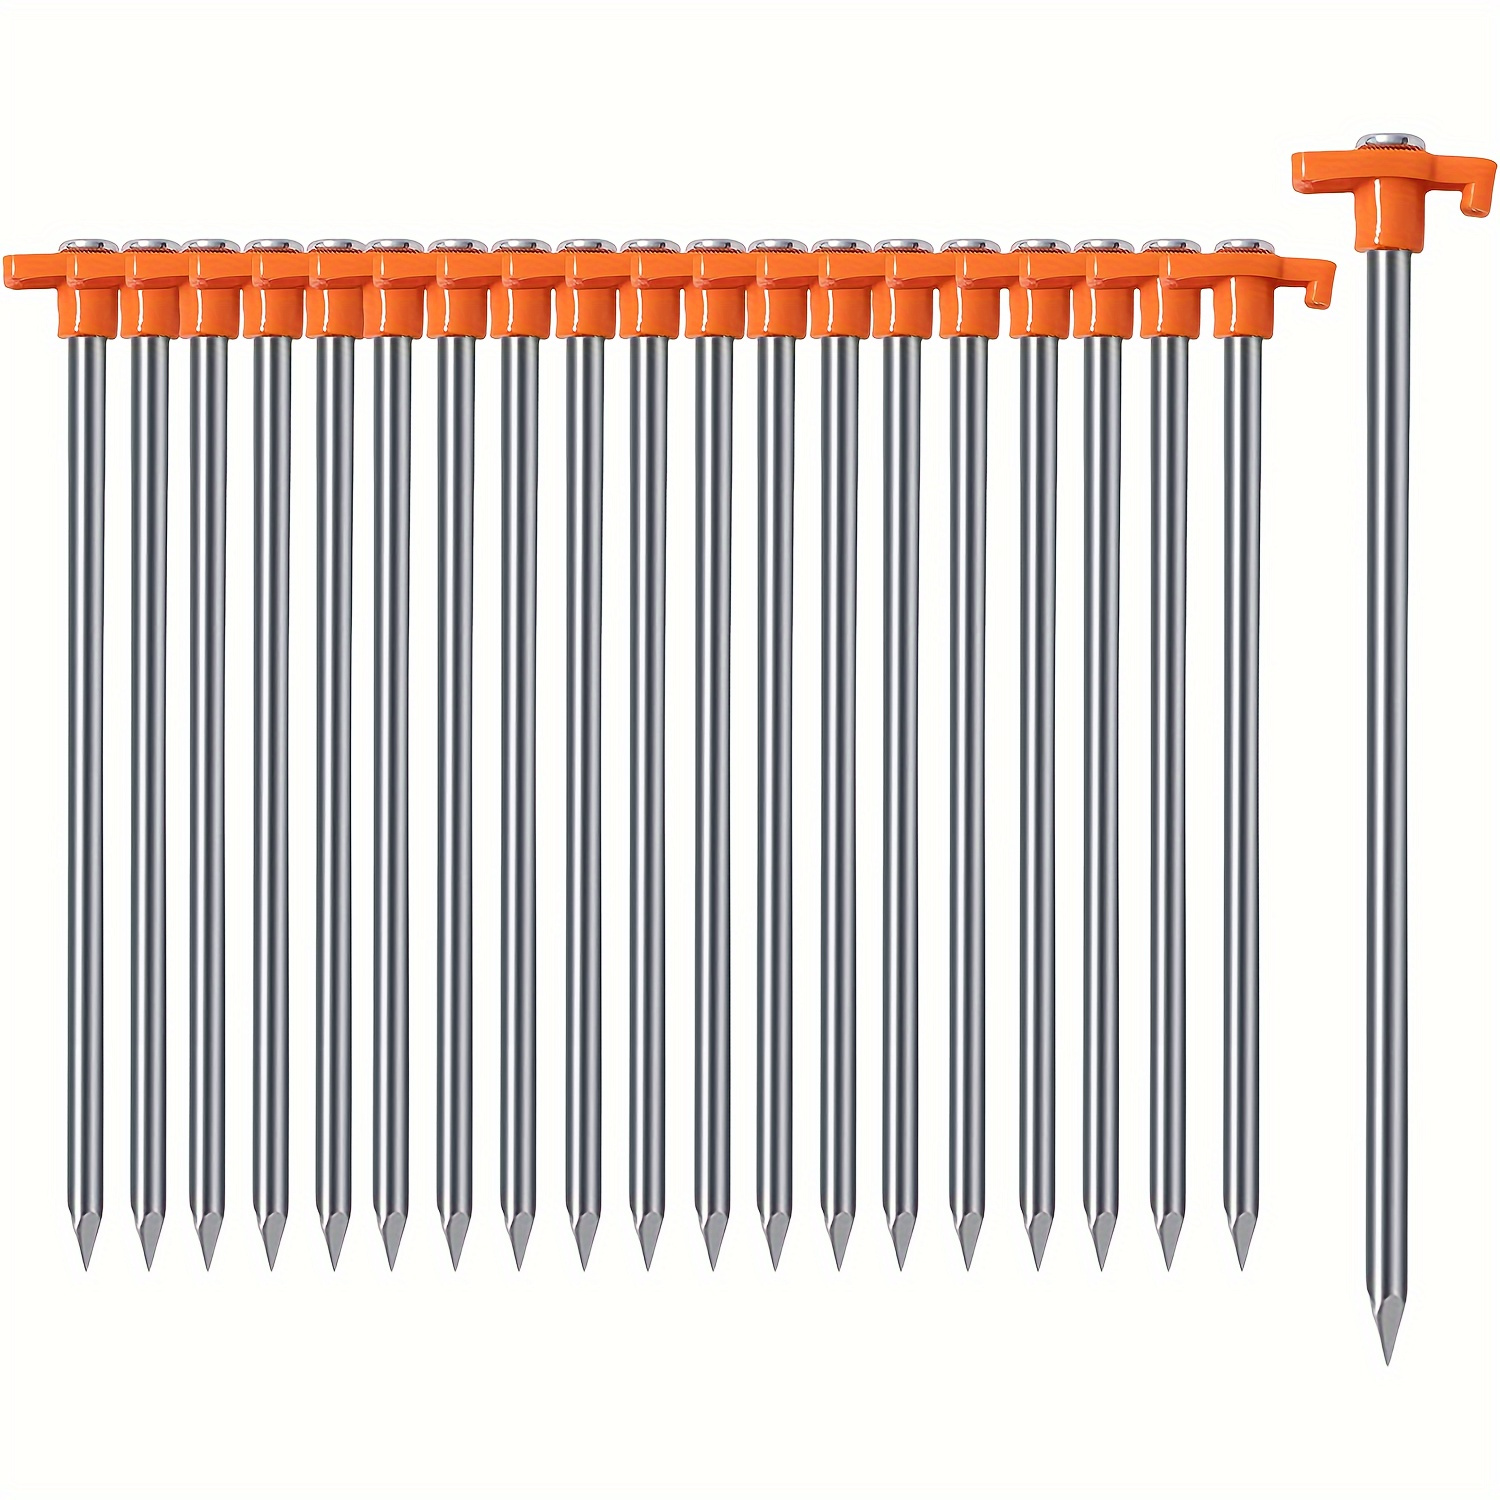 

10pcs Heavy Duty Tent Stakes, Metal Tent Pegs Ground Stakes, For Outdoor Camping, Patio, Garden, Canopies